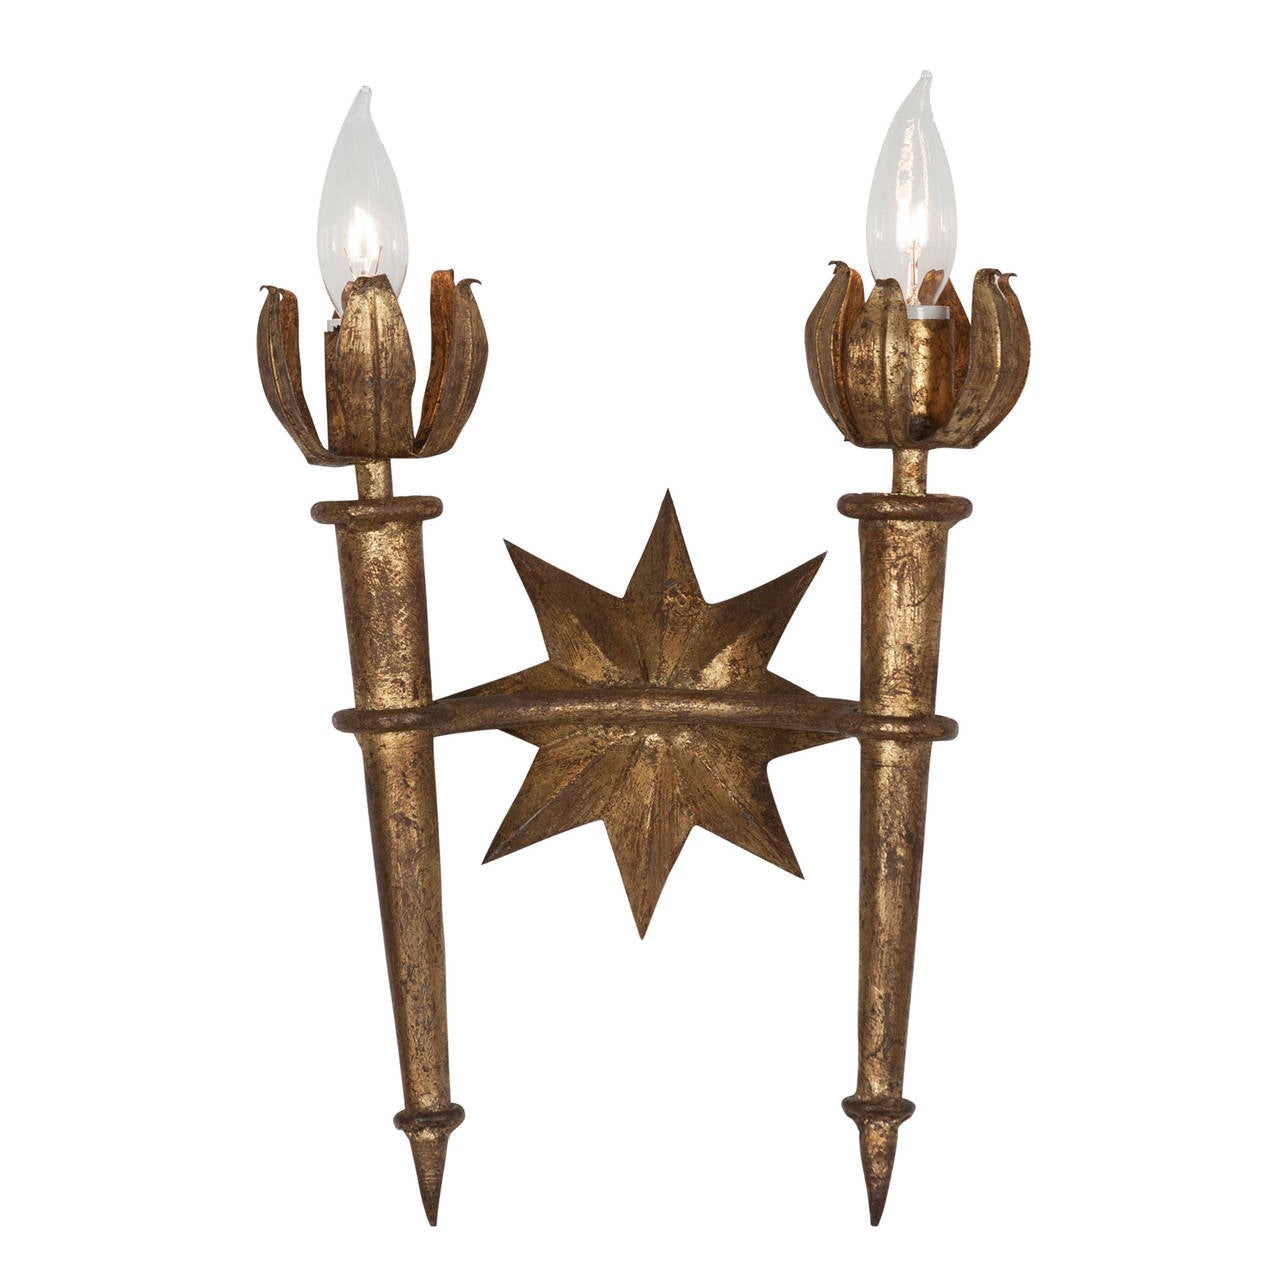 Pair of two arm torch form dore metal wall sconces, the torch tapering and finishing with petal flame bulb surround, with center star form, in the style of Gilbert Poillerat, French 1940s. Height to top of bulb 17 1/2 in, width 10 1/2 in.